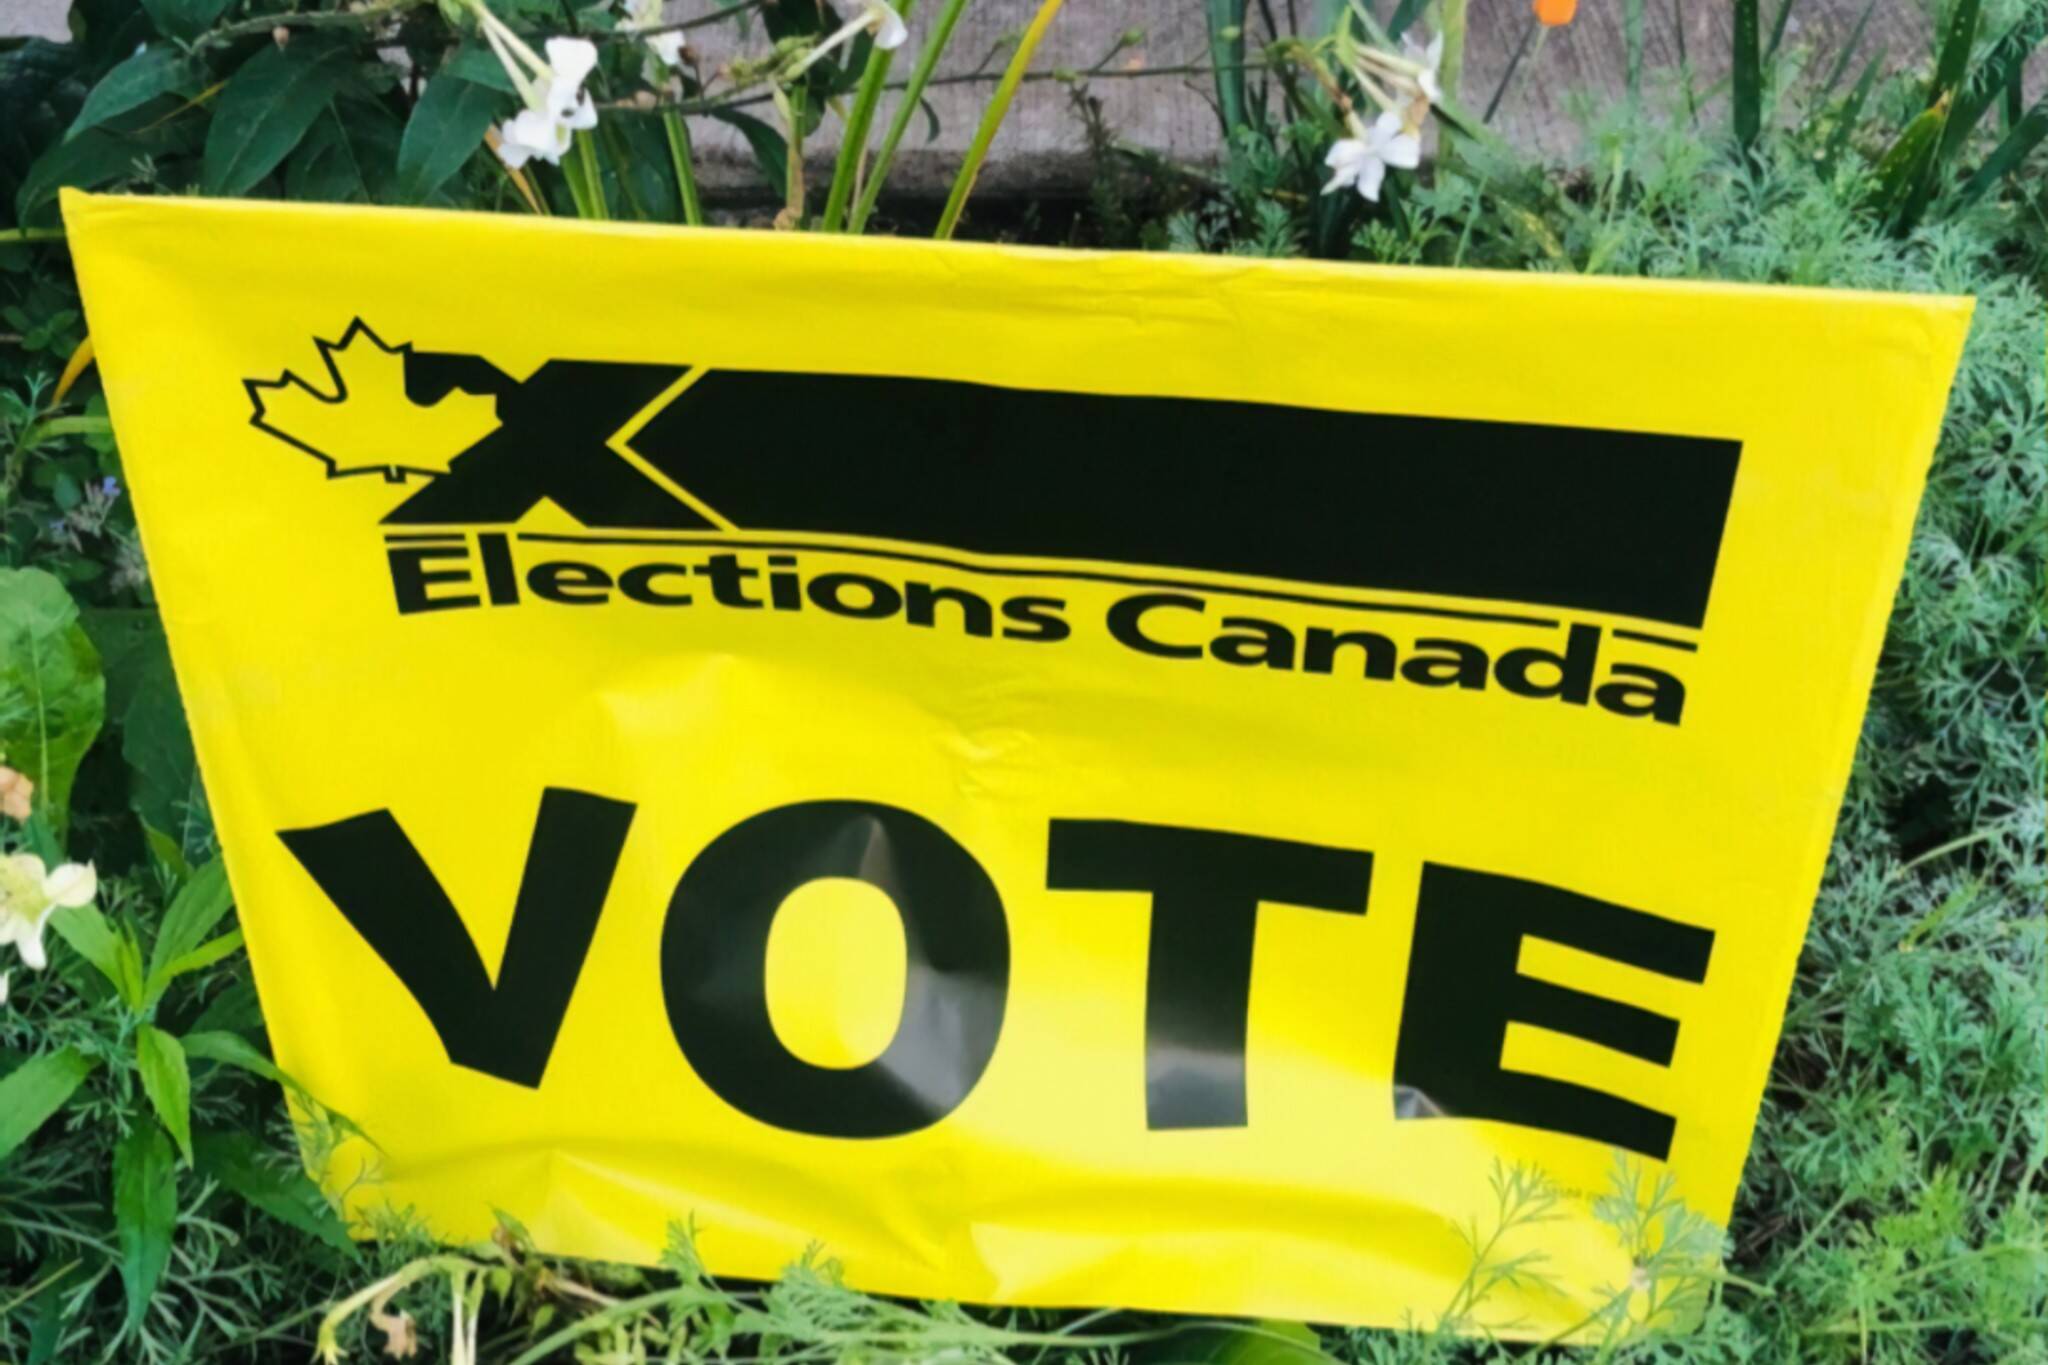 Early voting for the federal election in Canada is now open